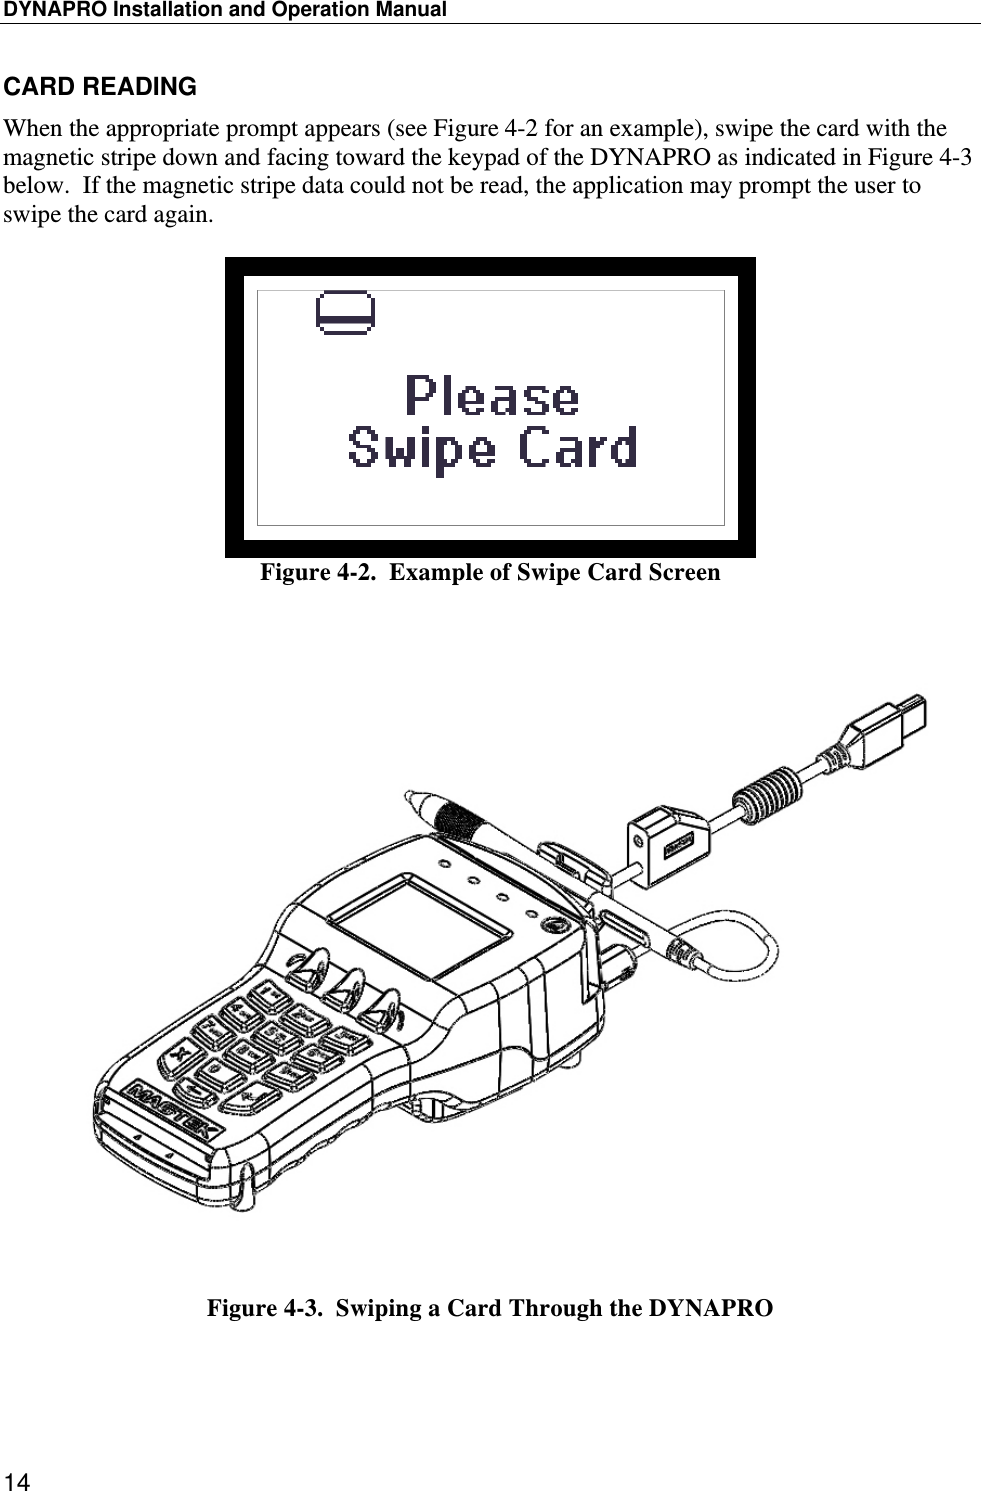 DYNAPRO Installation and Operation Manual 14 CARD READING When the appropriate prompt appears (see Figure 4-2 for an example), swipe the card with the magnetic stripe down and facing toward the keypad of the DYNAPRO as indicated in Figure 4-3 below.  If the magnetic stripe data could not be read, the application may prompt the user to swipe the card again.   Figure 4-2.  Example of Swipe Card Screen    Figure 4-3.  Swiping a Card Through the DYNAPRO  